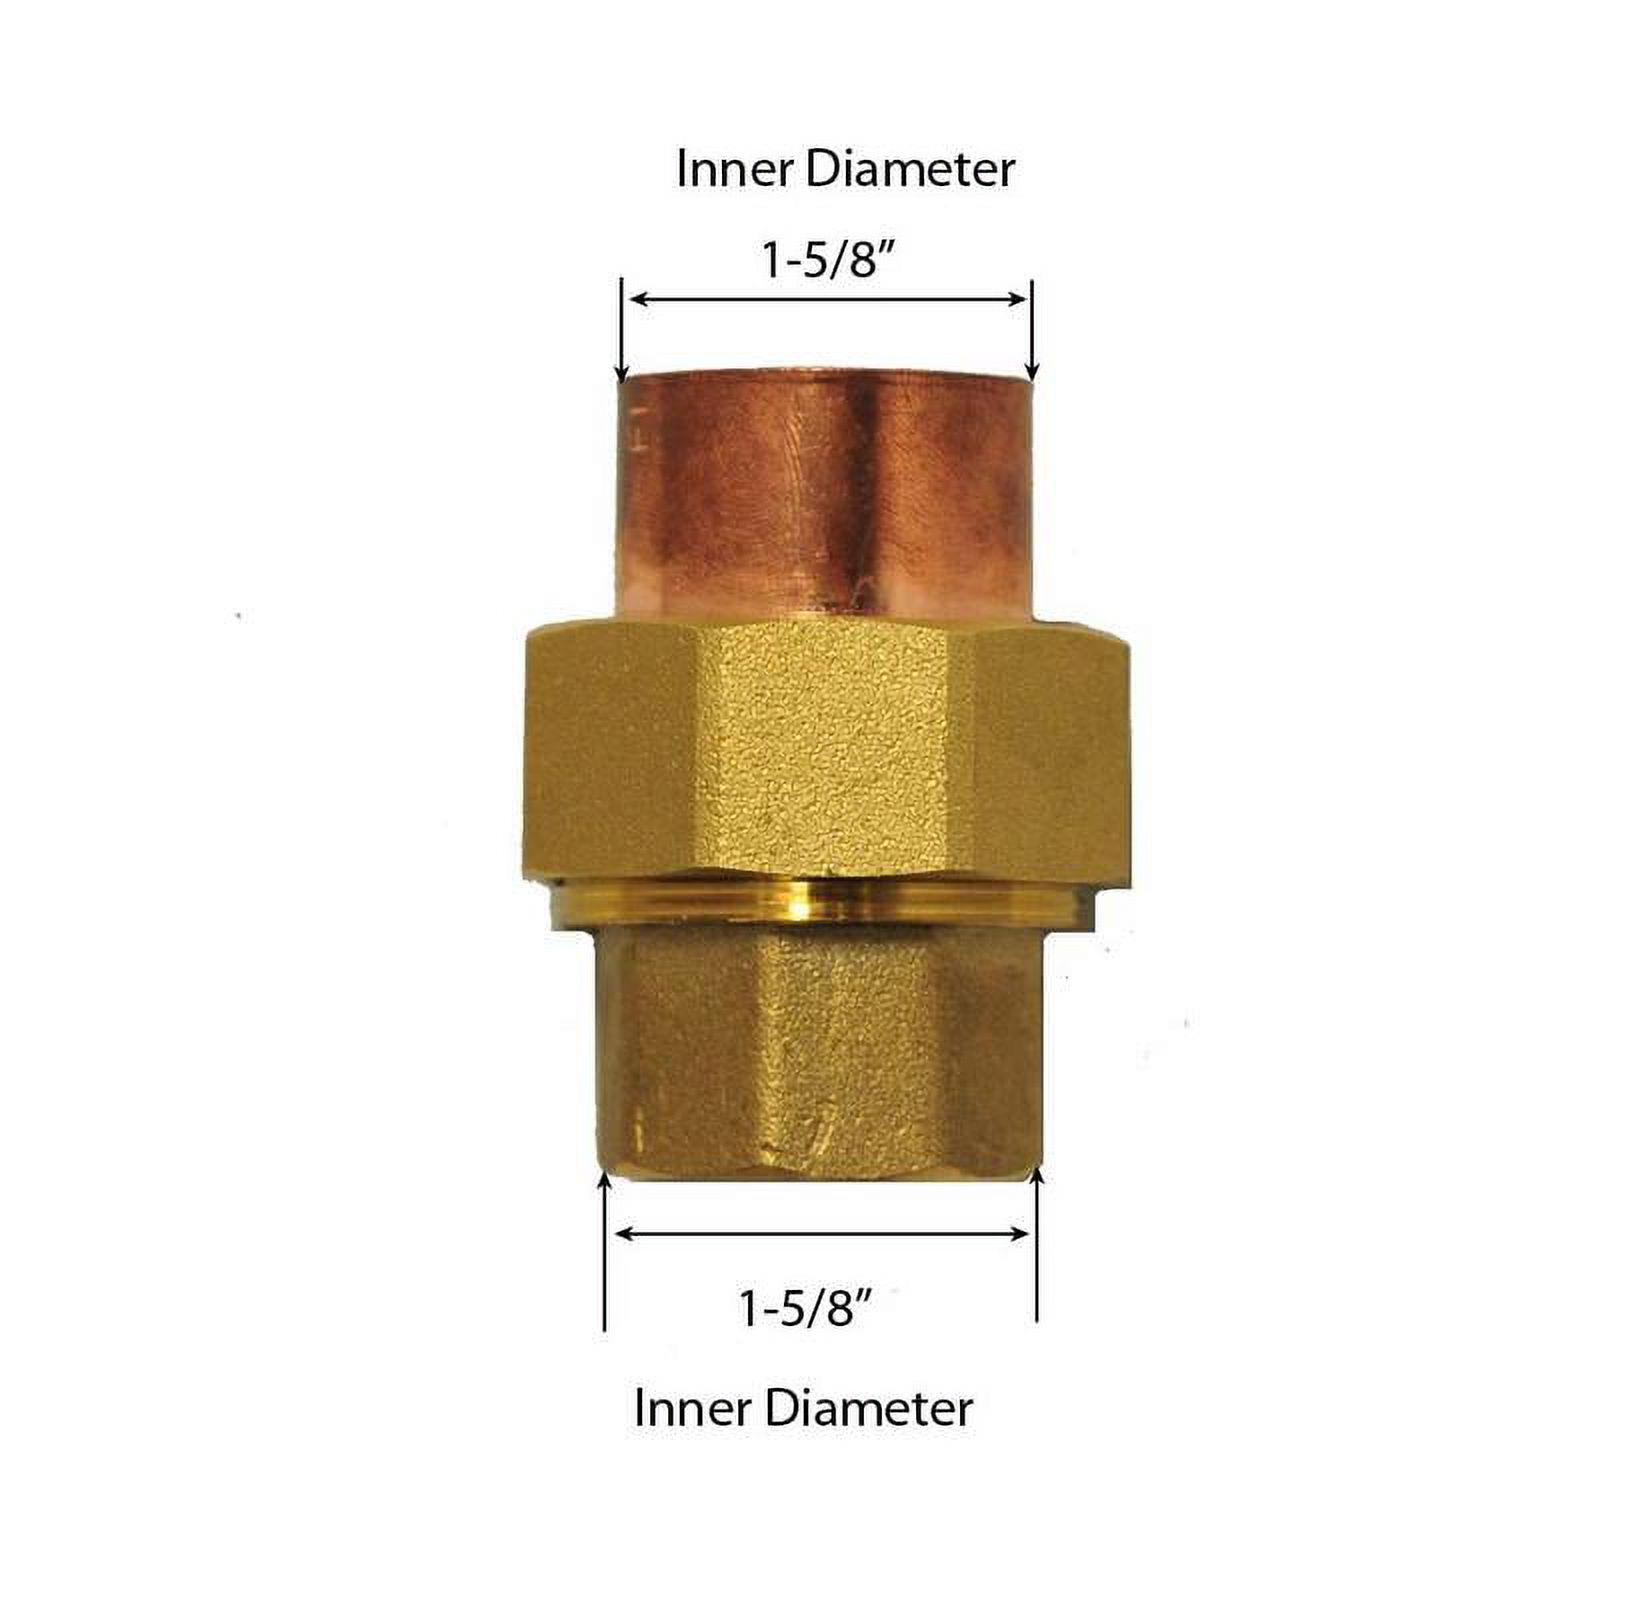 Libra Supply 1-1/2 inch Lead Free Copper Sweat Union C x C (Copper + Brass + Copper) Solder Joint, (click in for more size options)1-1/2'' Copper Pressure Pipe Fitting Plumbing Supply - image 1 of 3